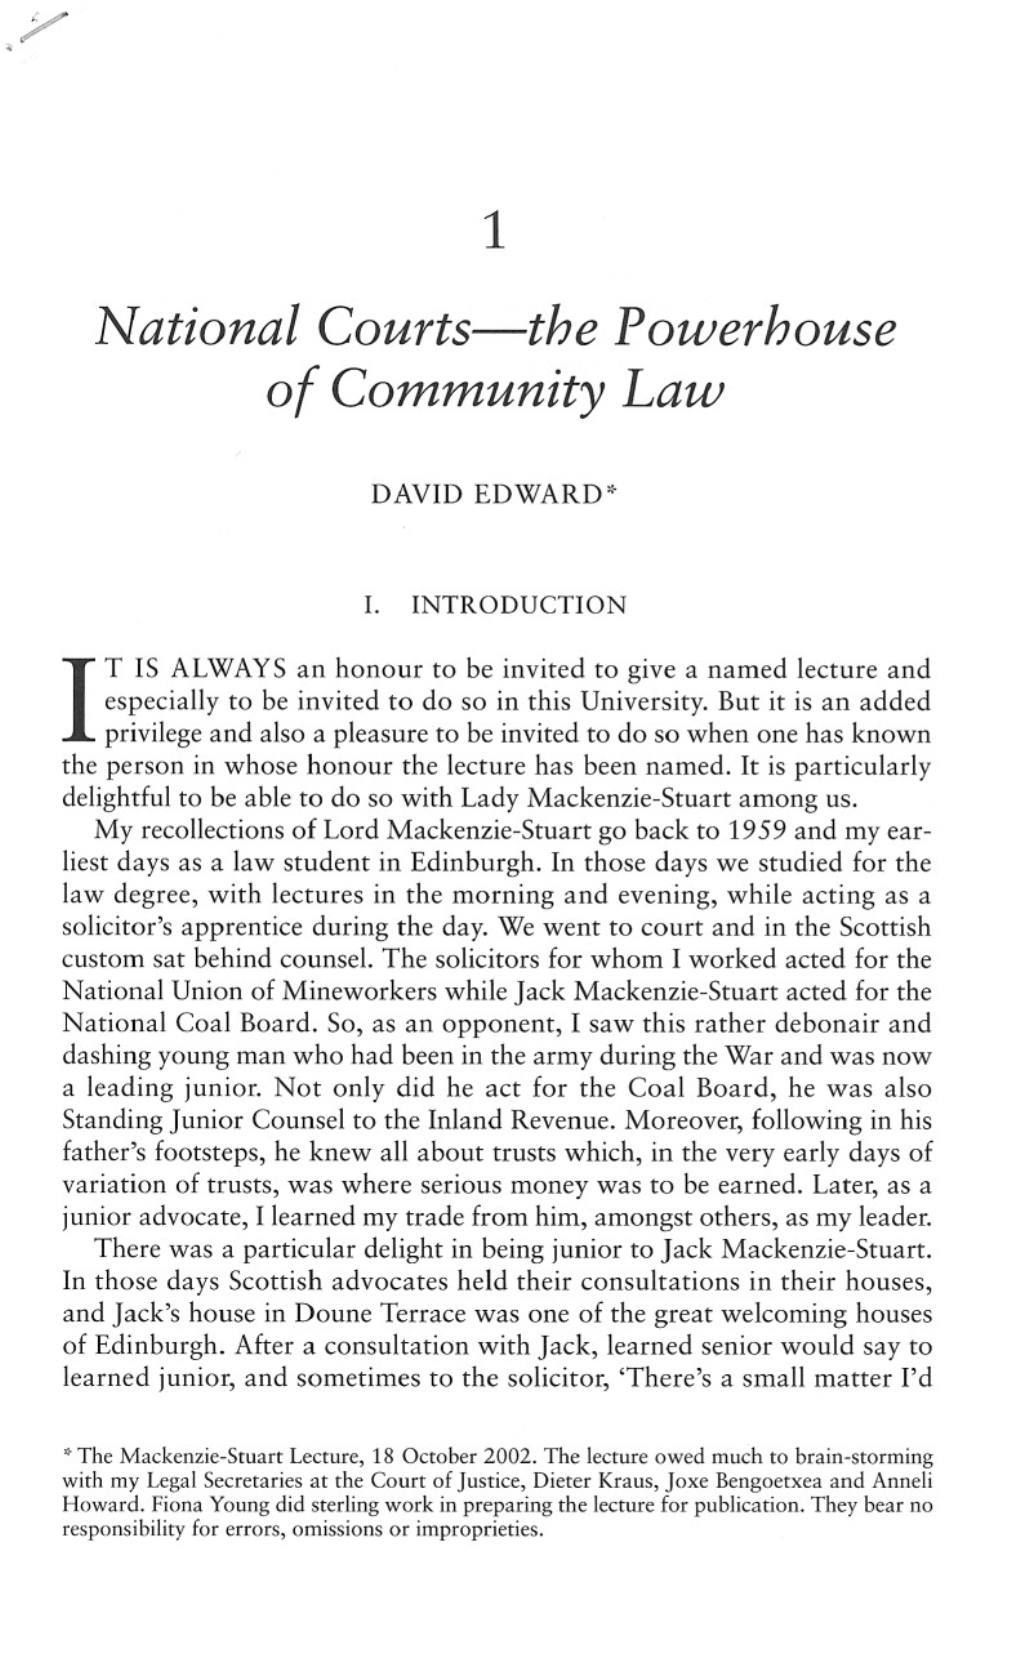 National Courts-The Powerhouse of Community Law